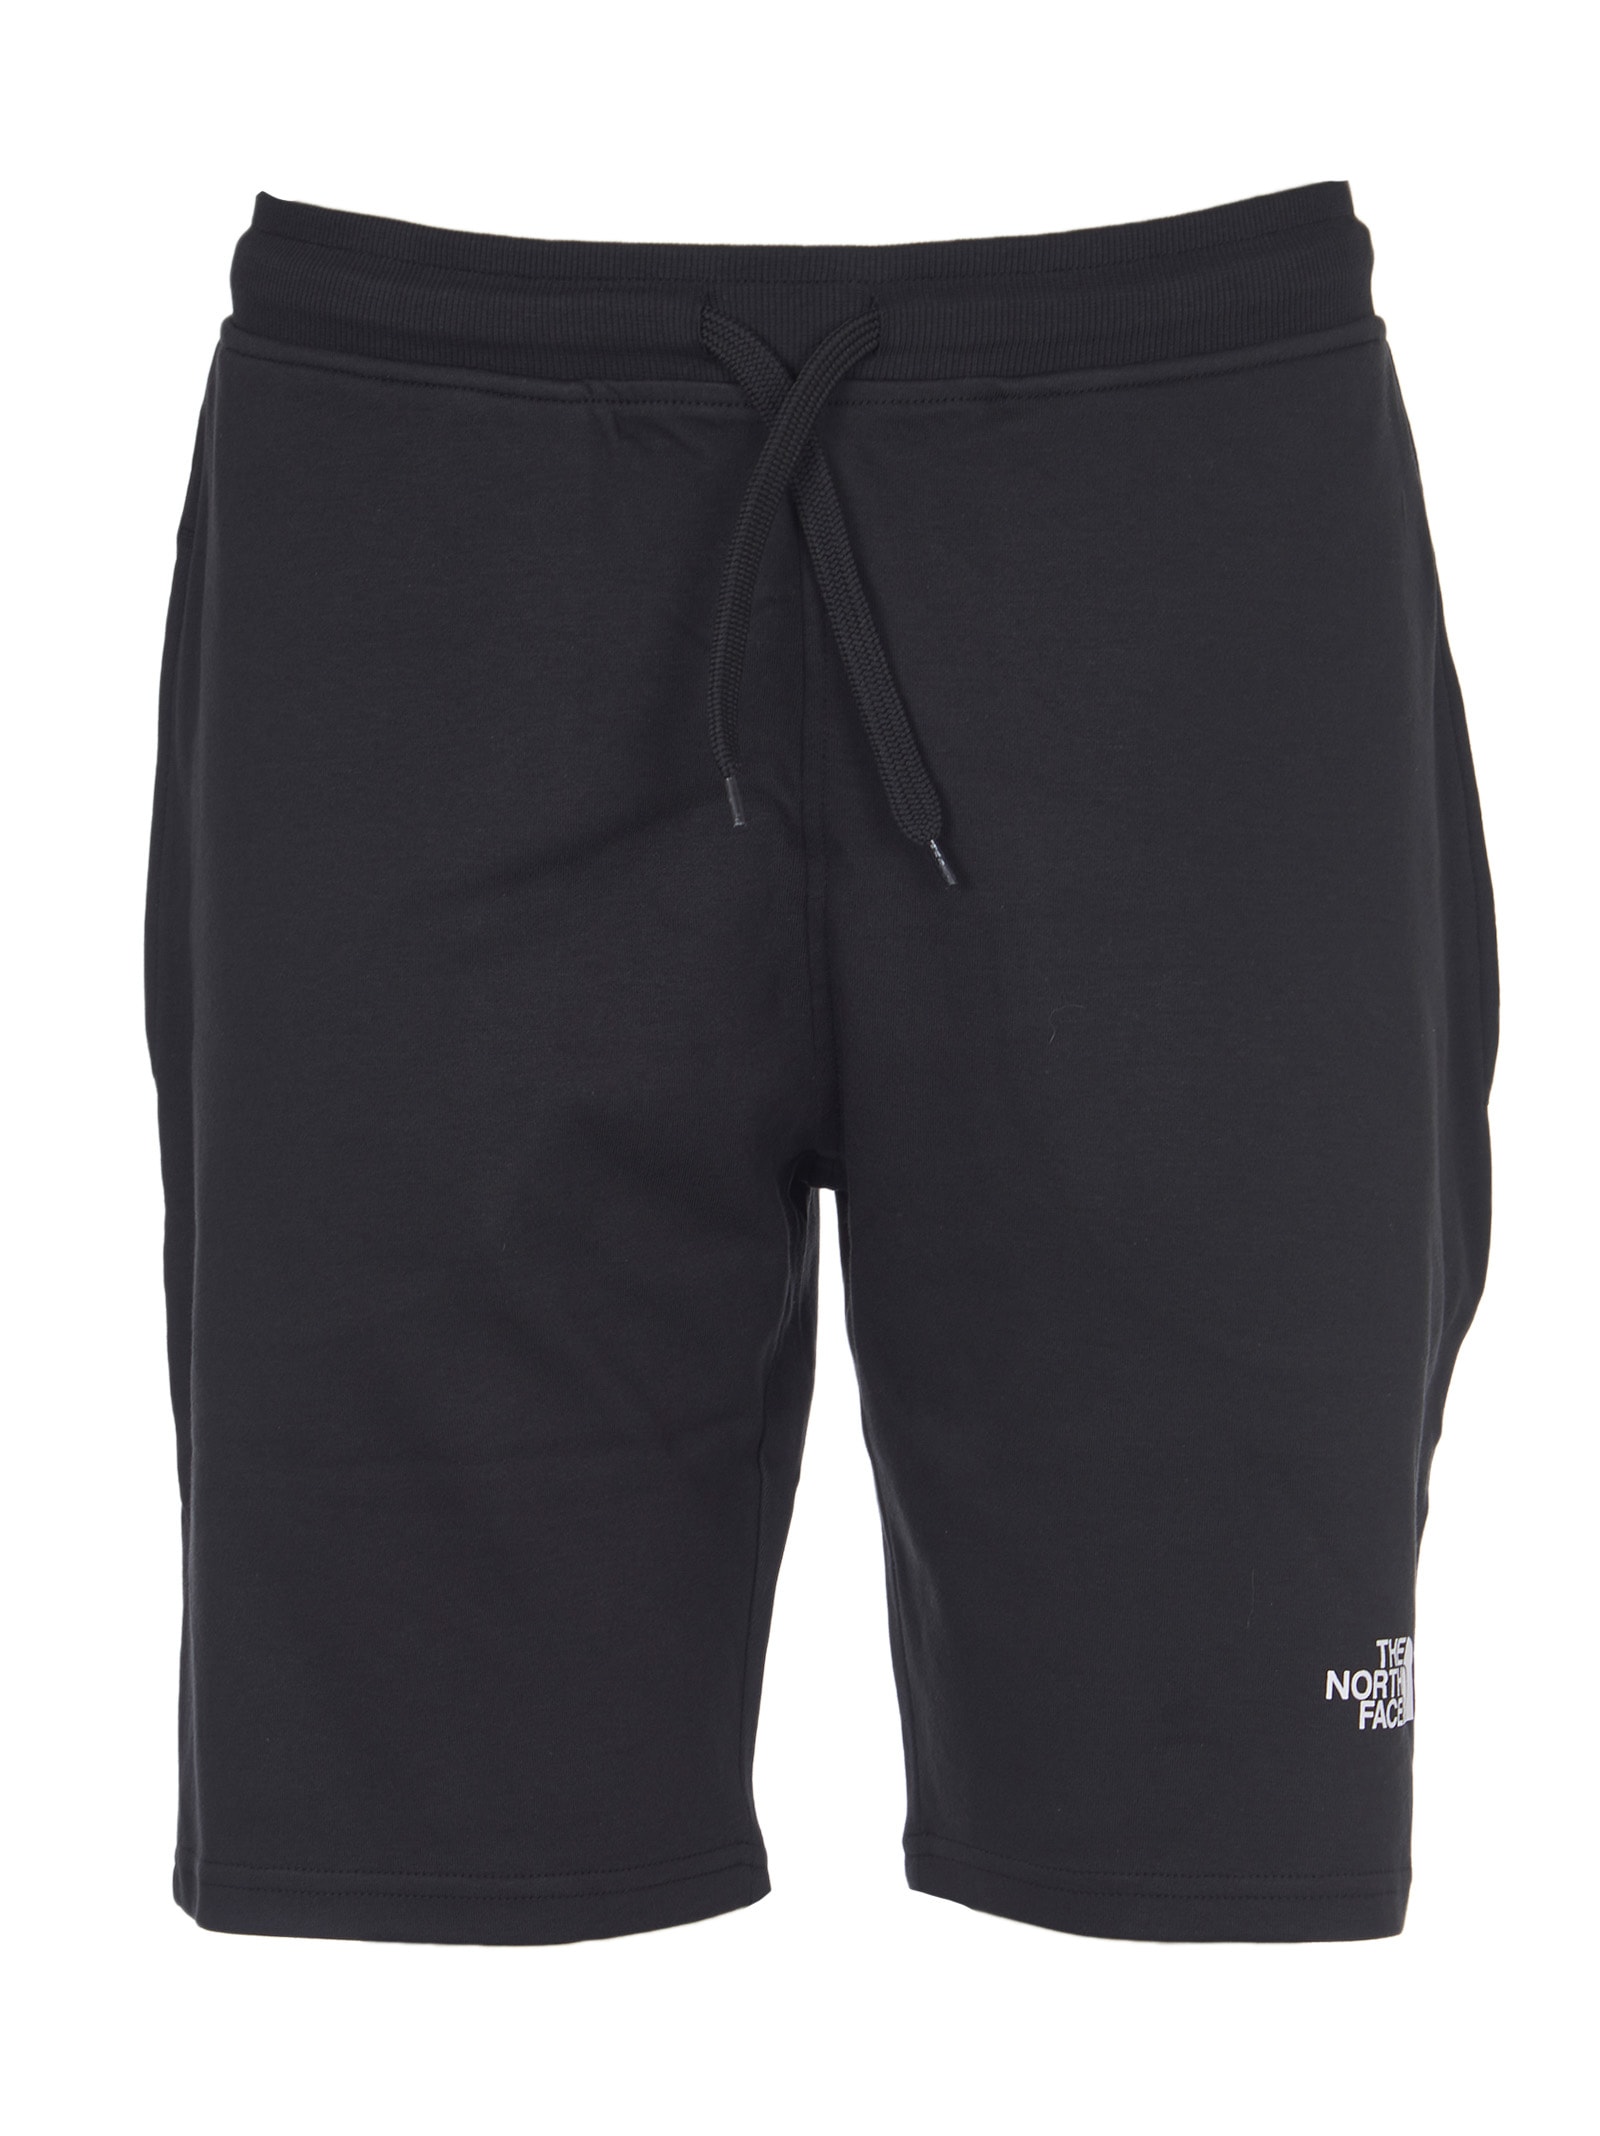 The North Face Black Shorts